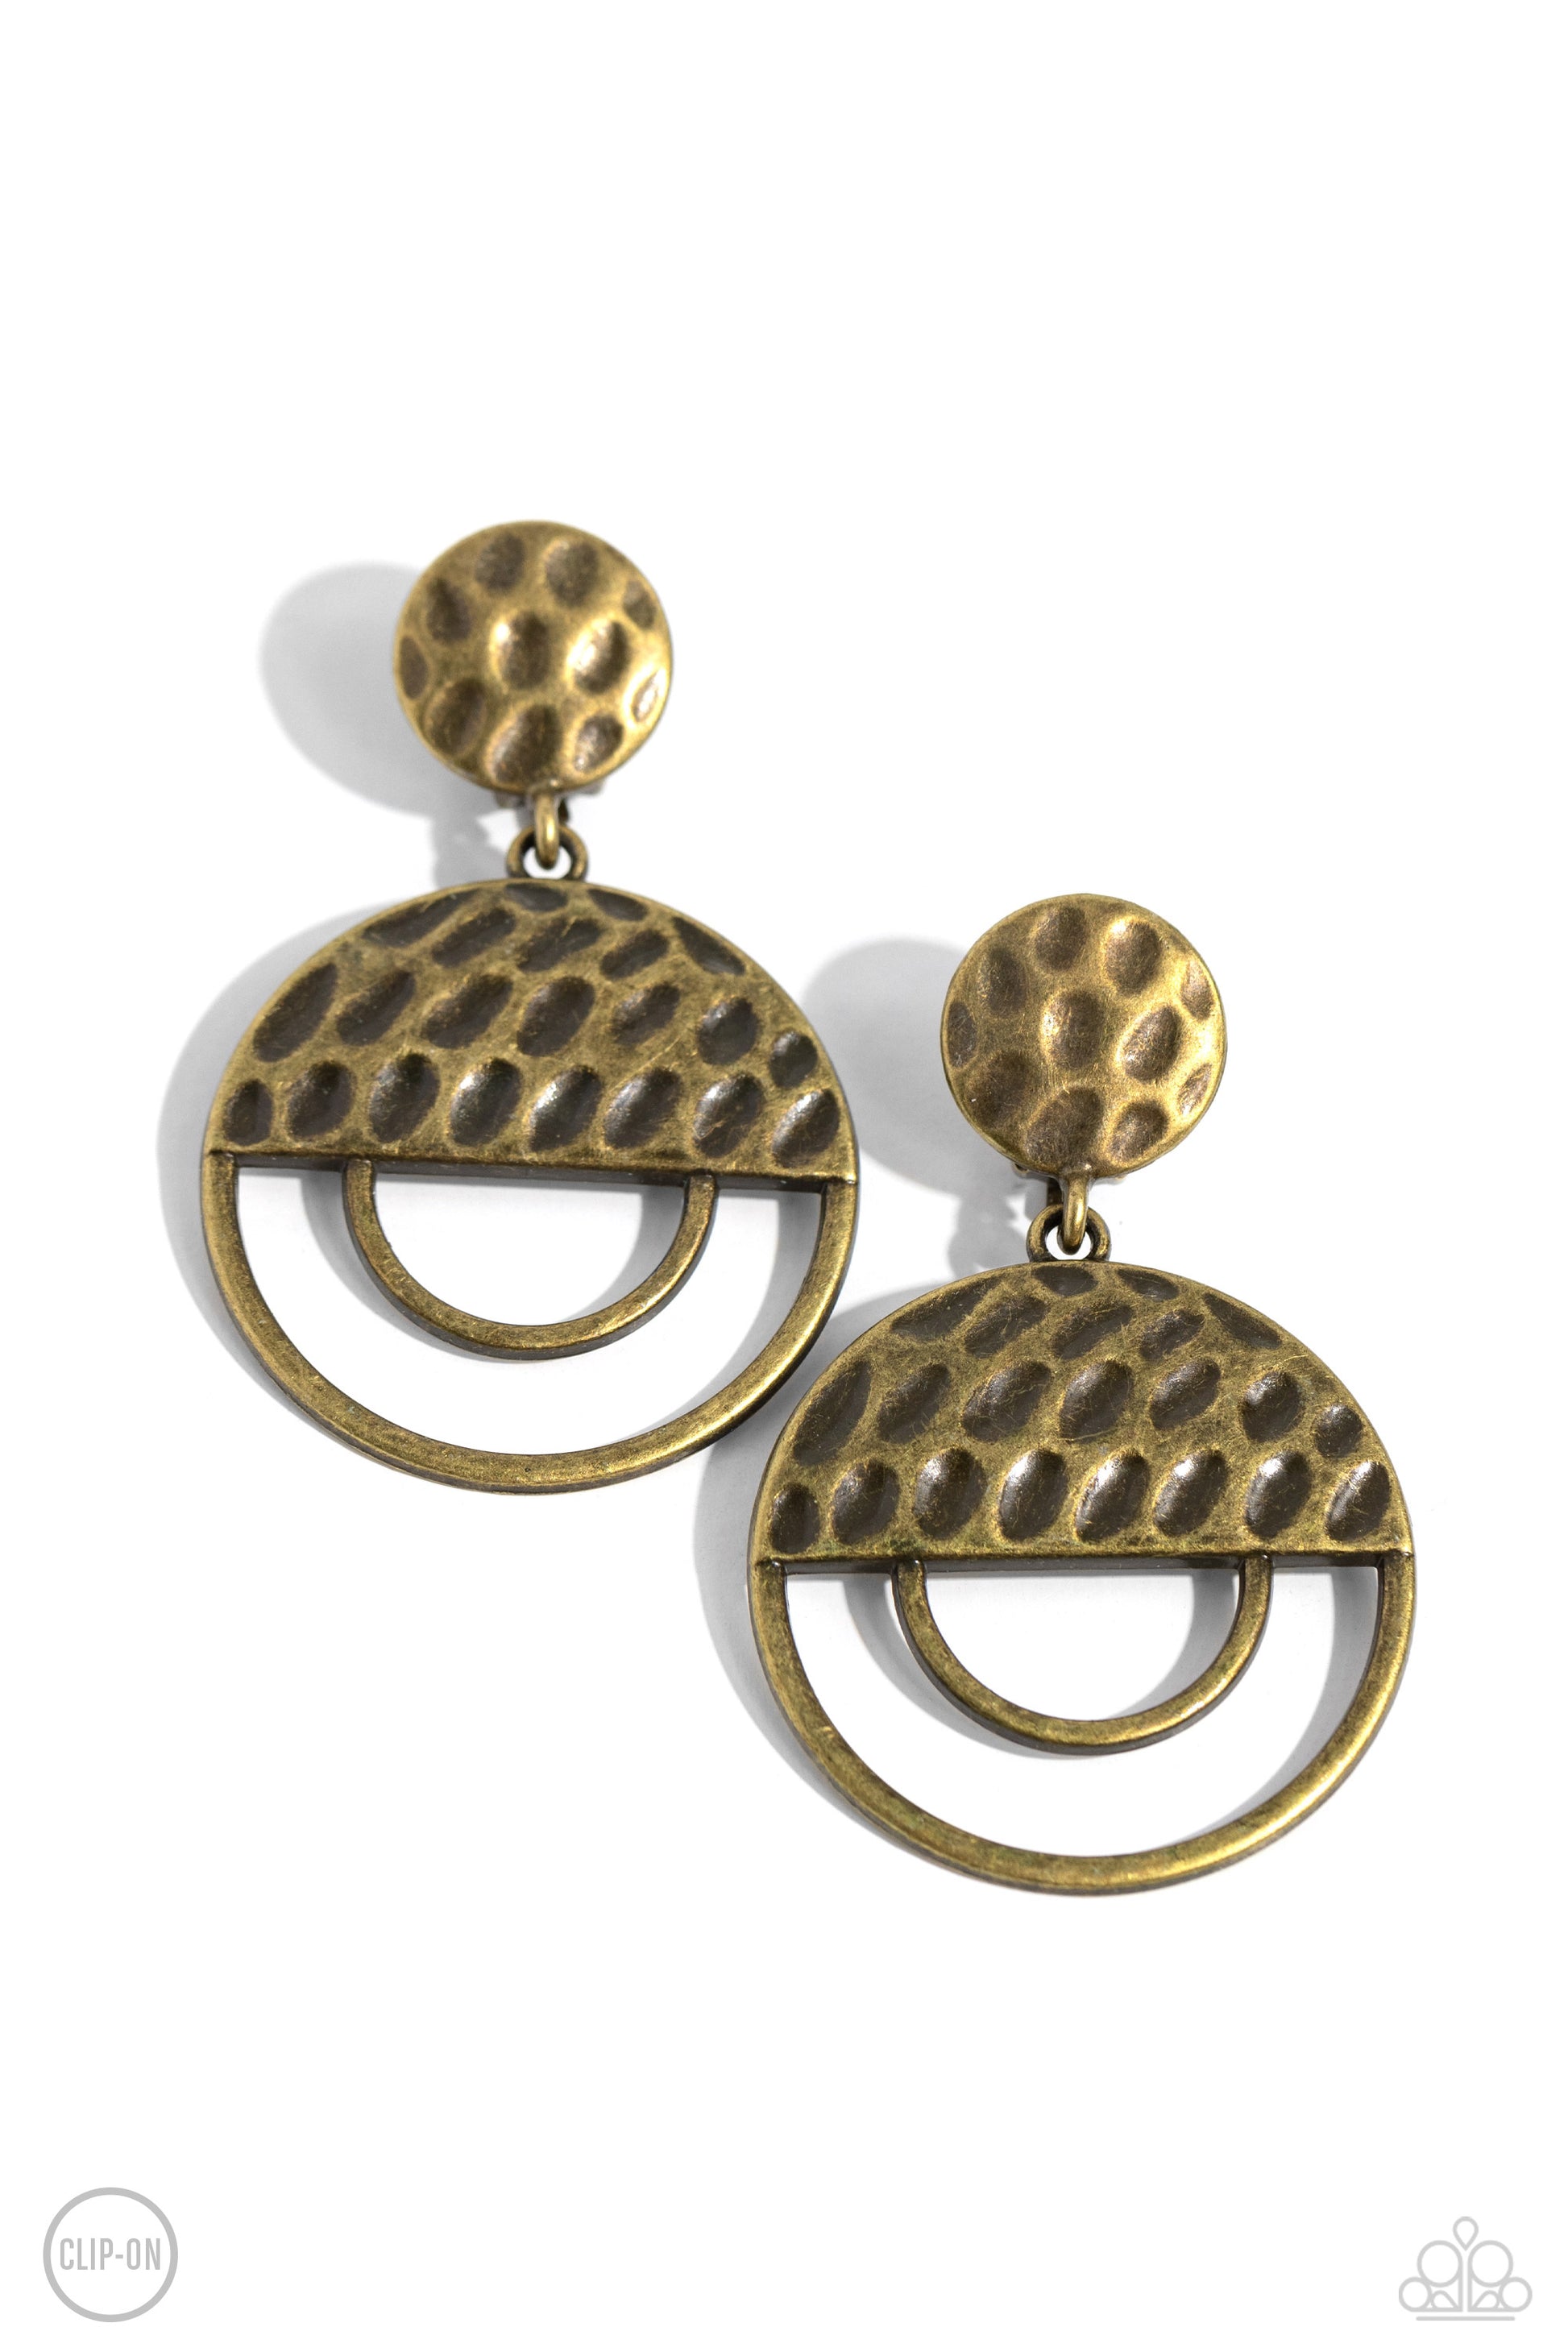 Southern Souvenir Brass Clip-On Earring - Paparazzi Accessories  A hammered brass disc gives way to a circular brass frame that is capped in a hammered half moon brass accent, resulting in a rustic lure. Earring attaches to a standard clip-on fitting.  Sold as one pair of clip-on earrings.  Sku:  P5CO-BRXX-029XX